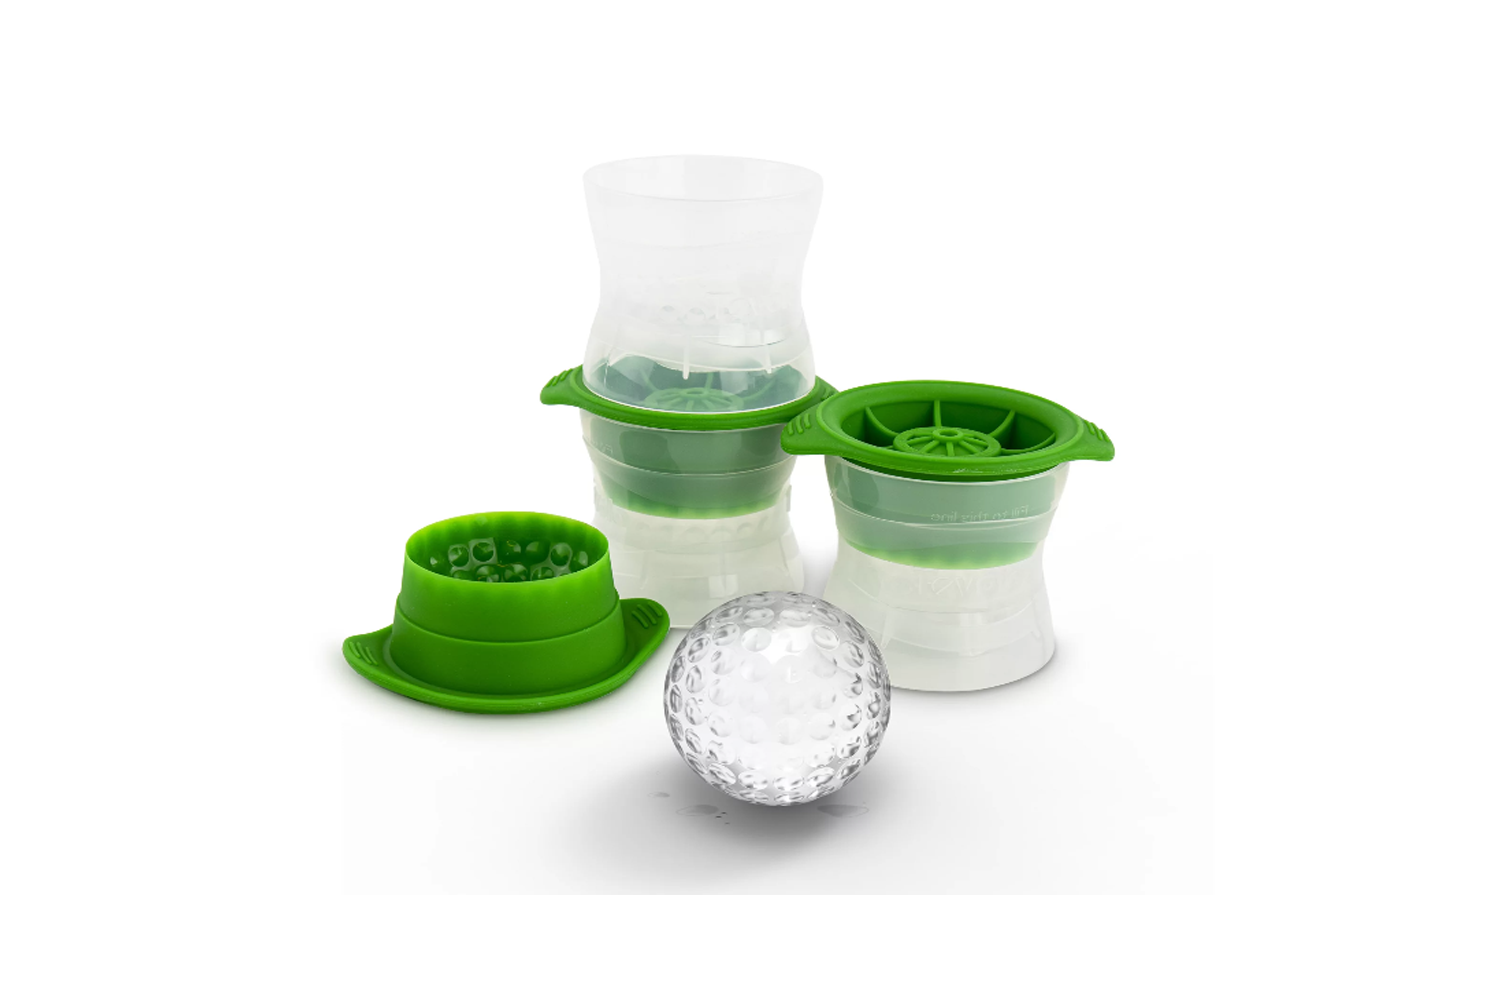 https://www.themanual.com/wp-content/uploads/sites/9/2021/02/tovolo-golf-ball-ice-molds.png?fit=800%2C533&p=1